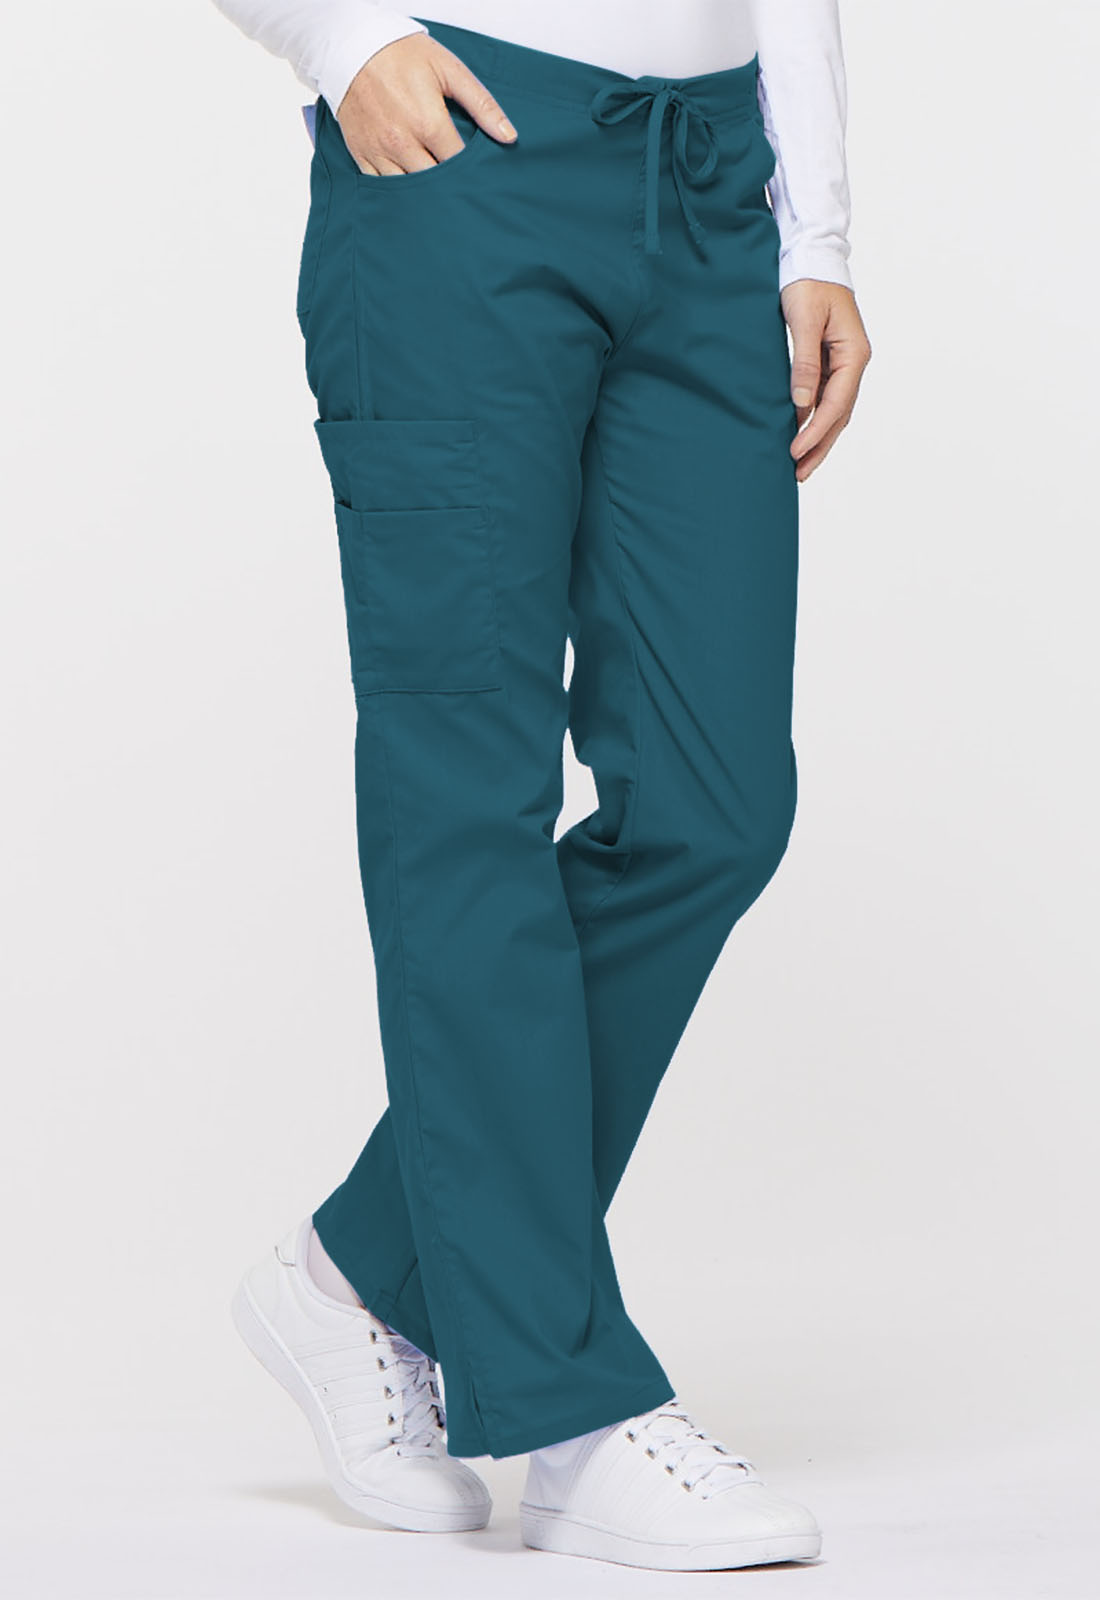 Dickies Women's Cargo Scrub Pants, Mid Rise with Drawstring - 86206 - image 4 of 7